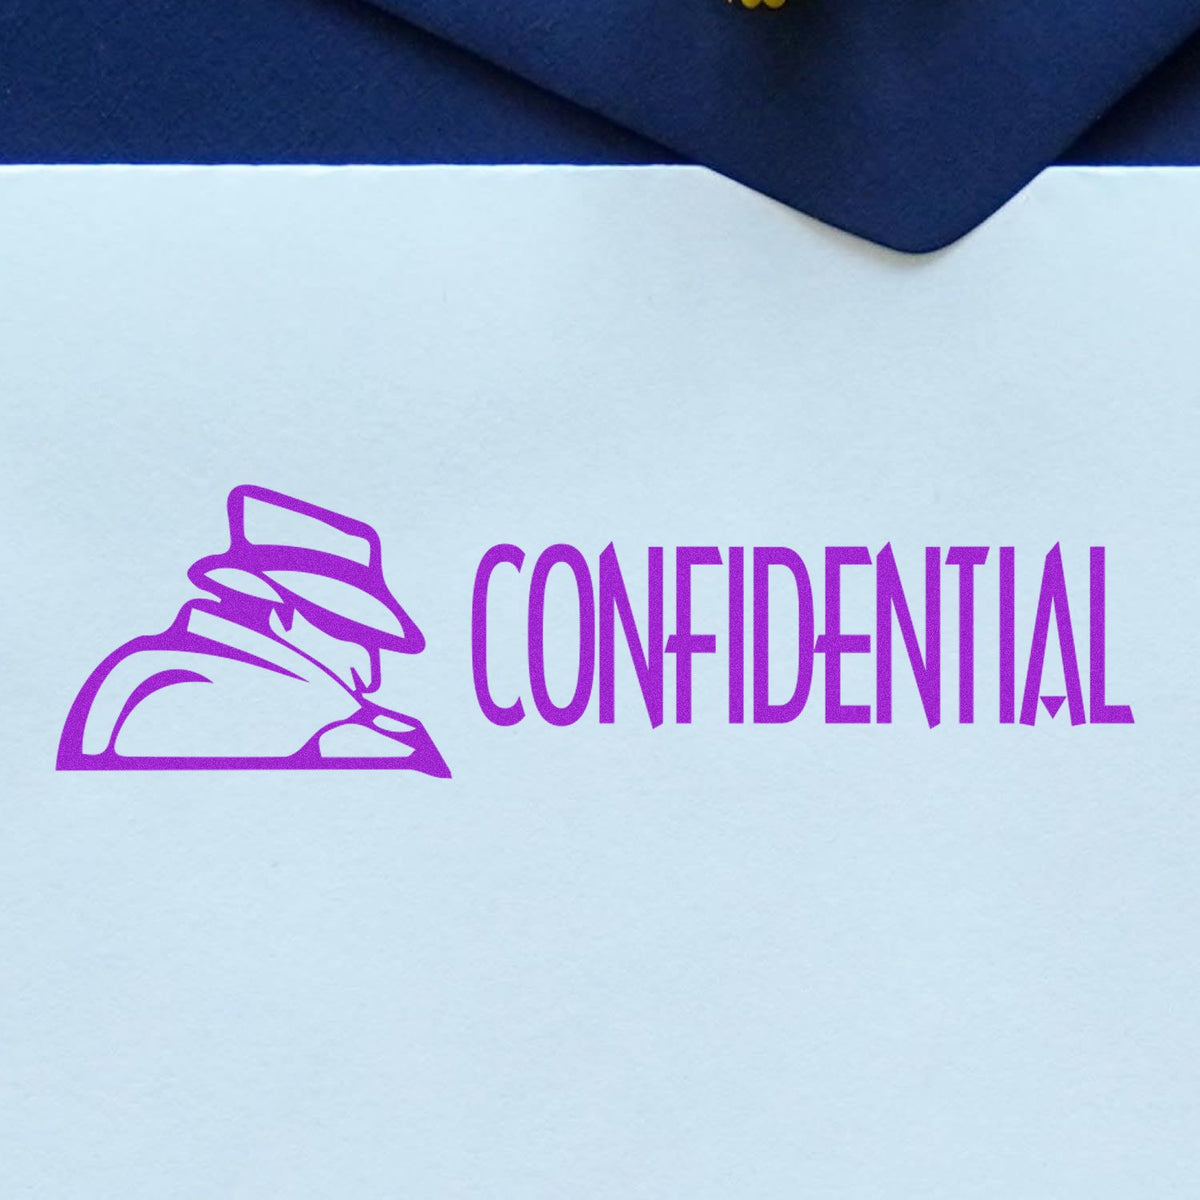 Large Confidential with Logo Rubber Stamp In Use